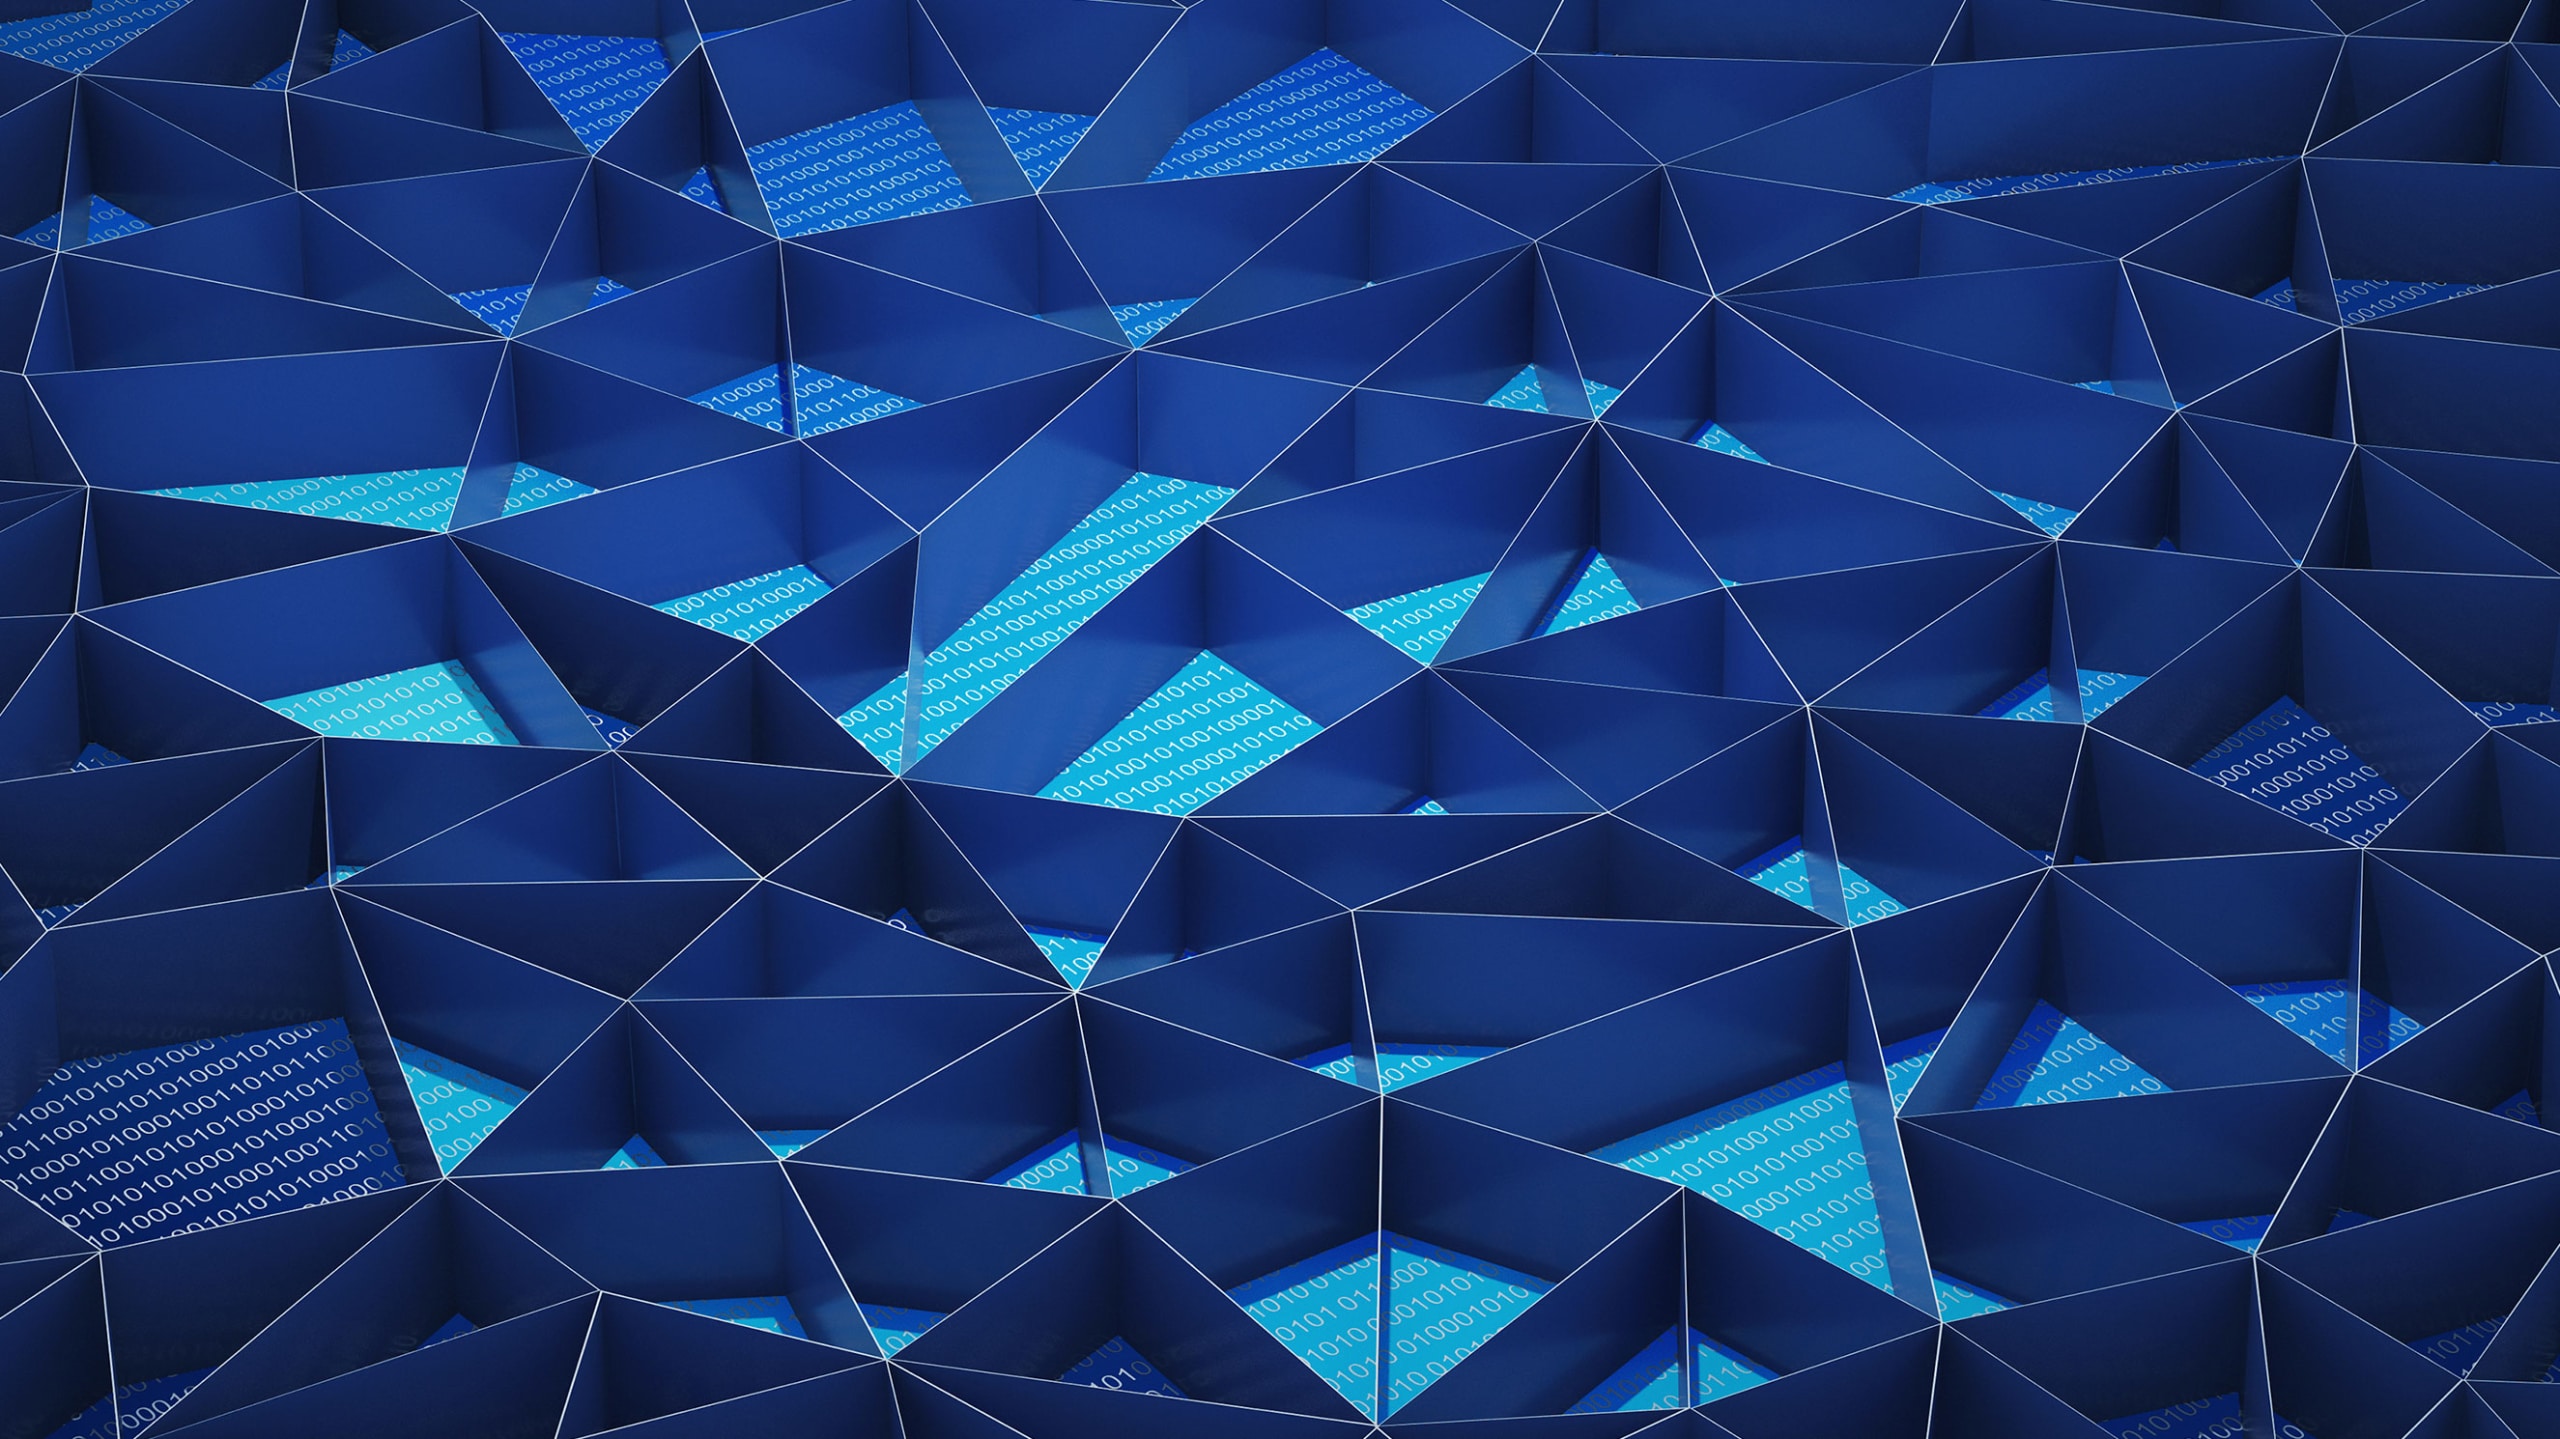 Abstract geometric background featuring a multitude of blue triangular facets, some with digital binary code patterns, creating a vibrant, textured 3d appearance.